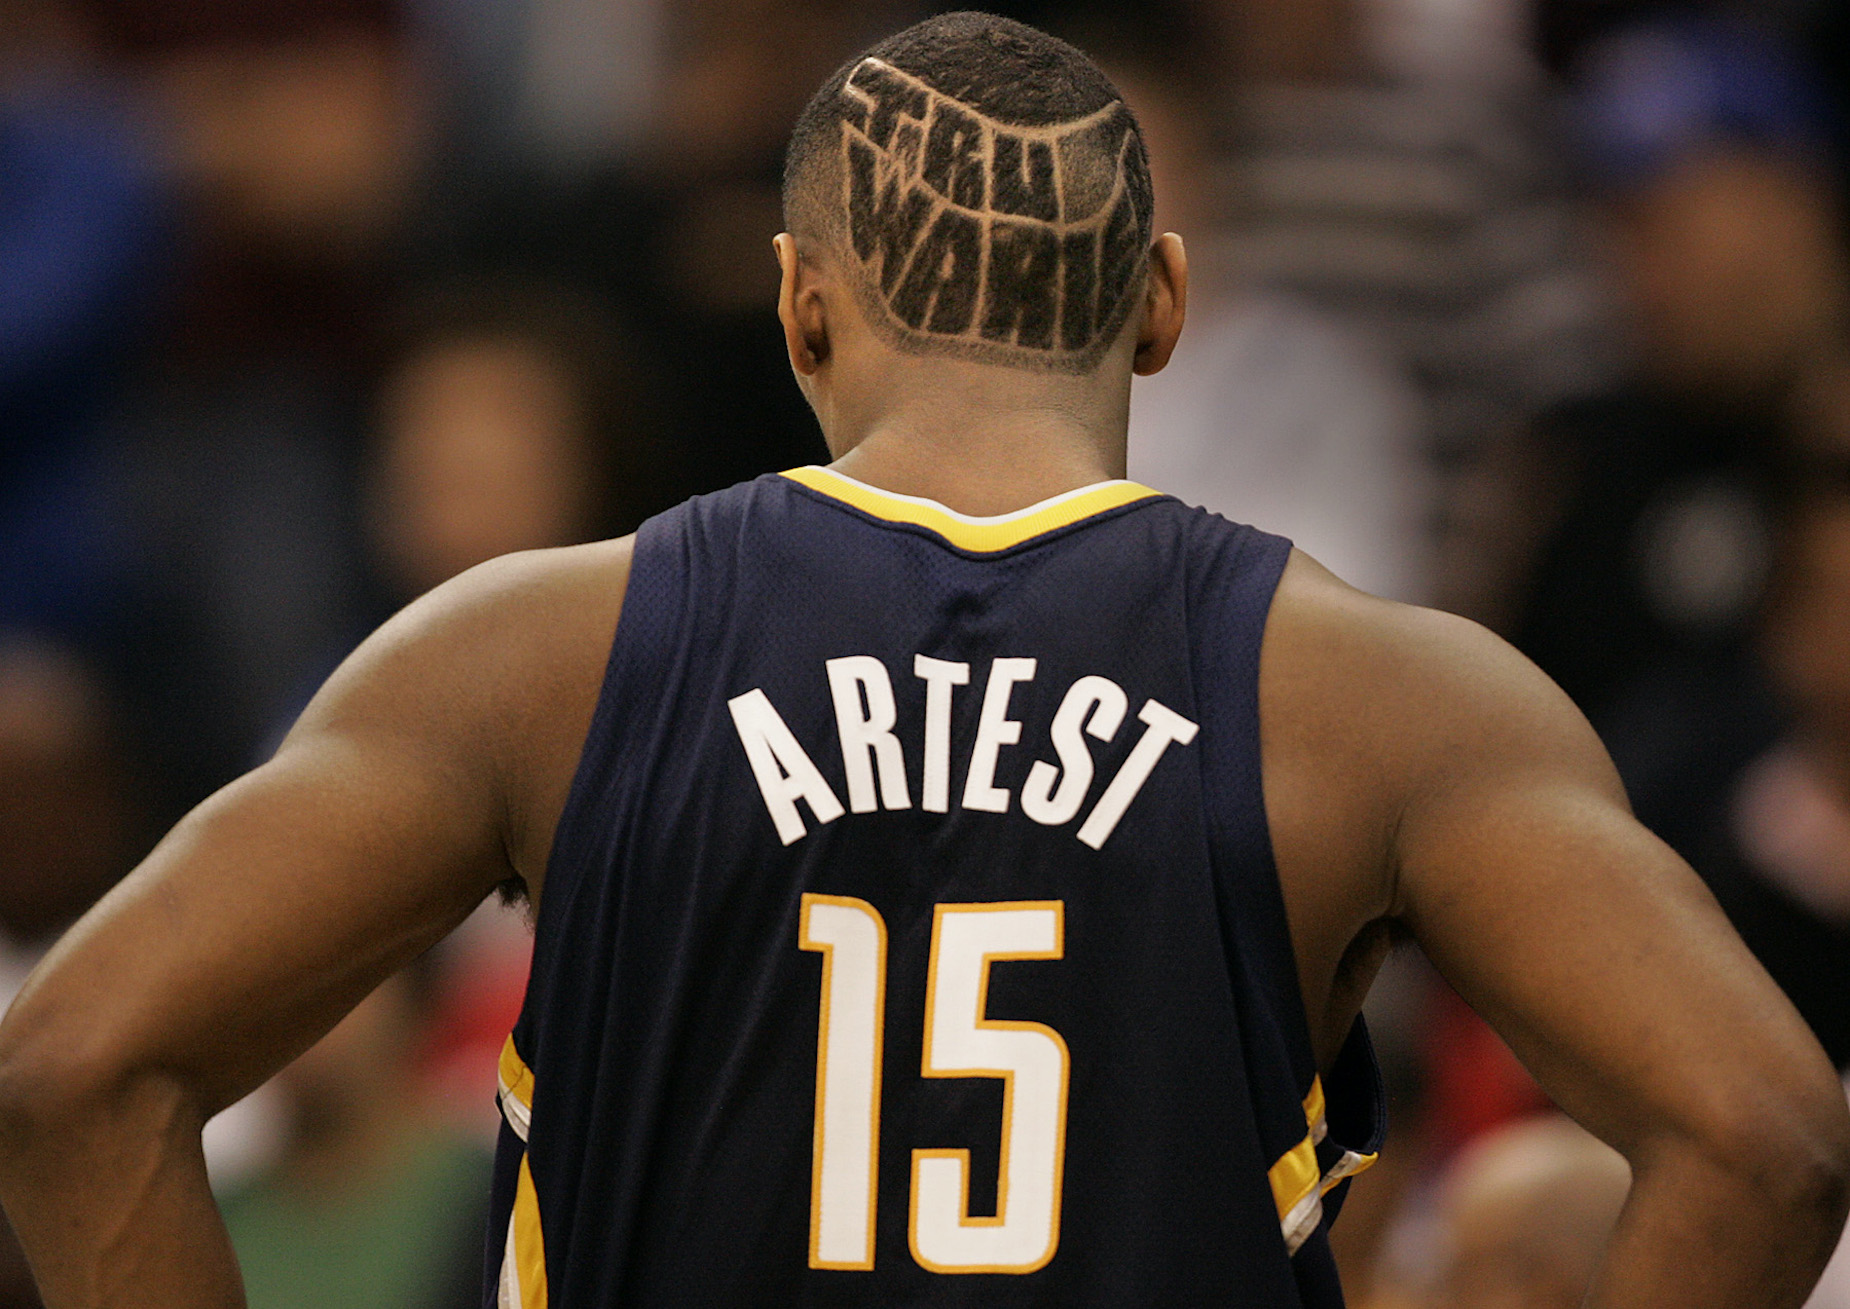 Indiana Pacer forward Ron Artest stands on the court.